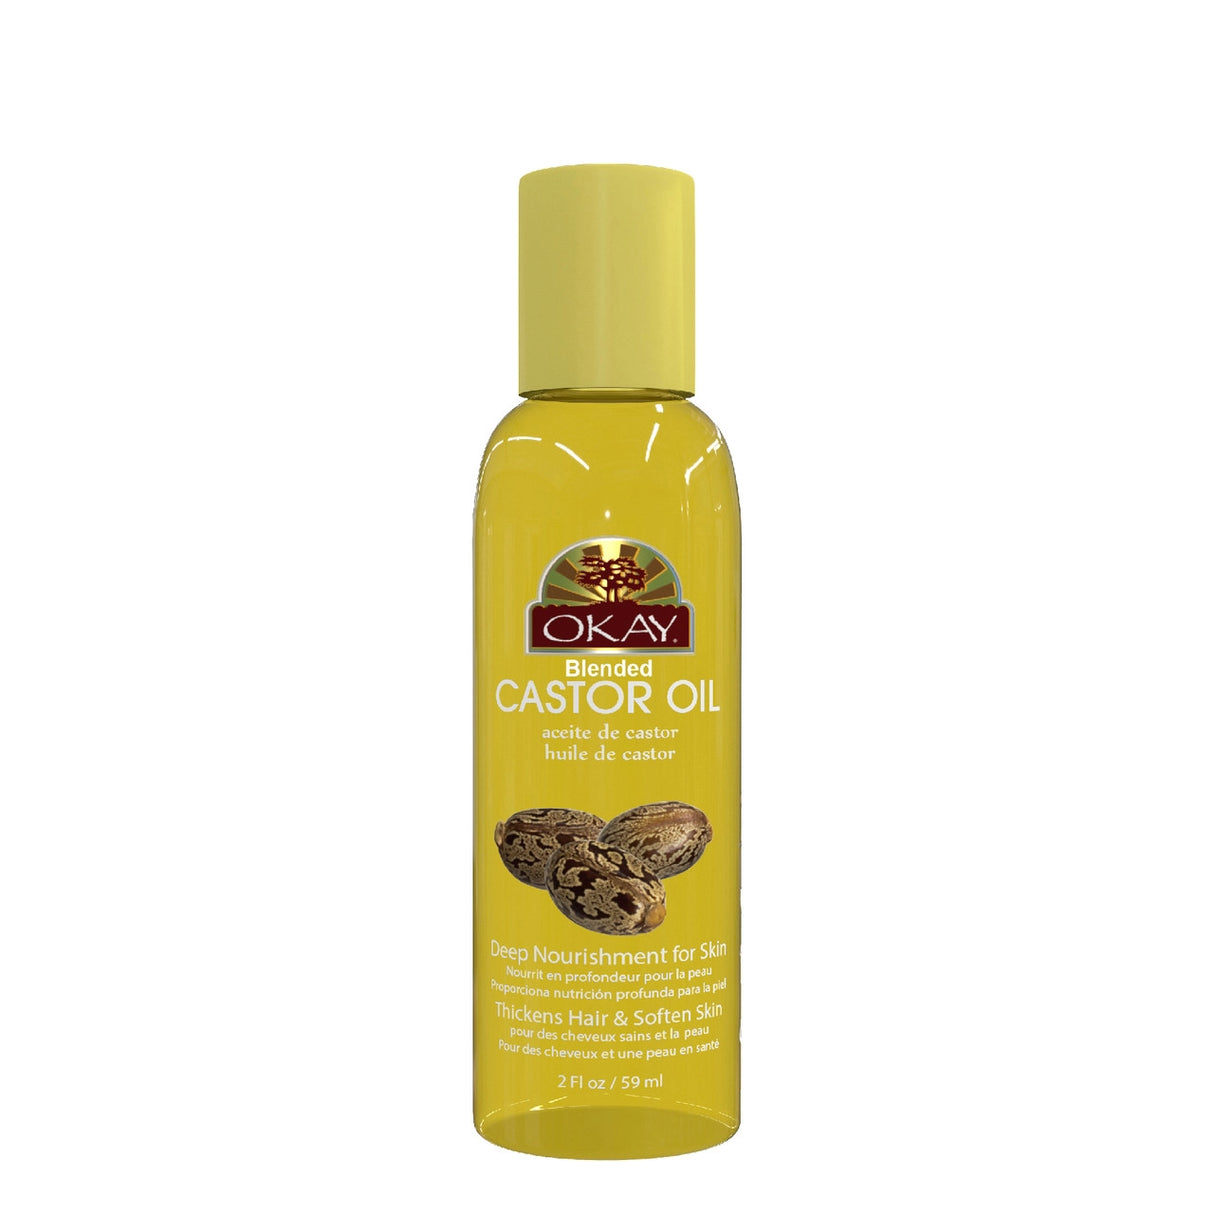 OKAY Pure Natural® Castor Oil for Hair, Skin And Body